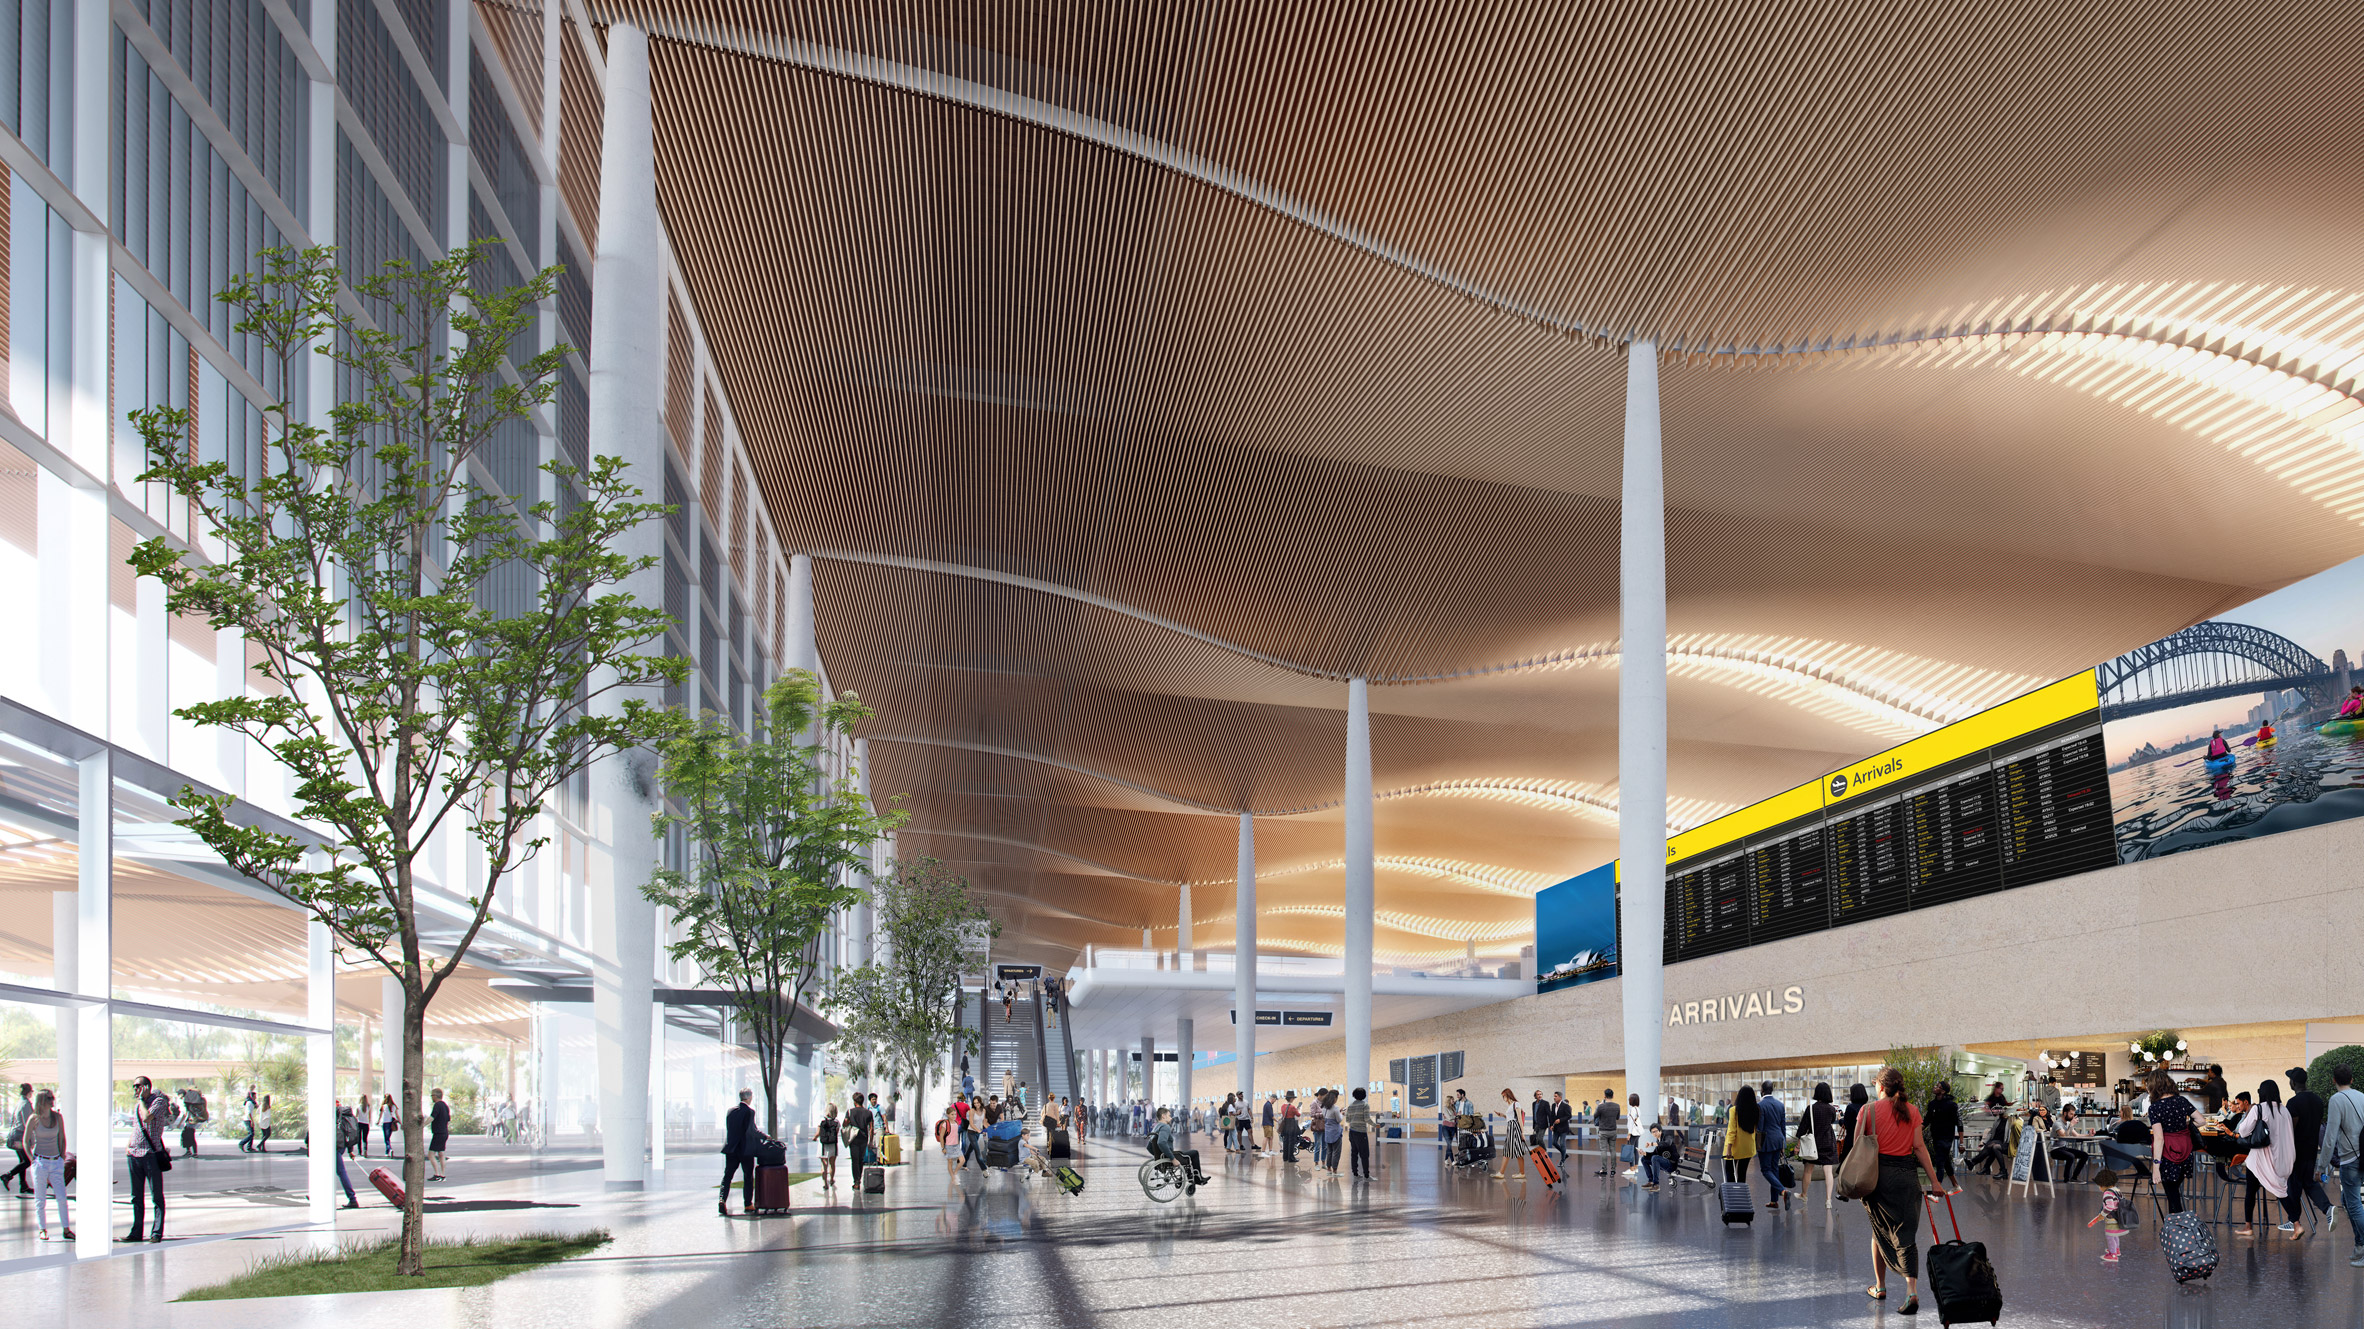 Visuals of Western Sydney International Airport by Zaha Hadid Architects and Cox Architecture in Australia